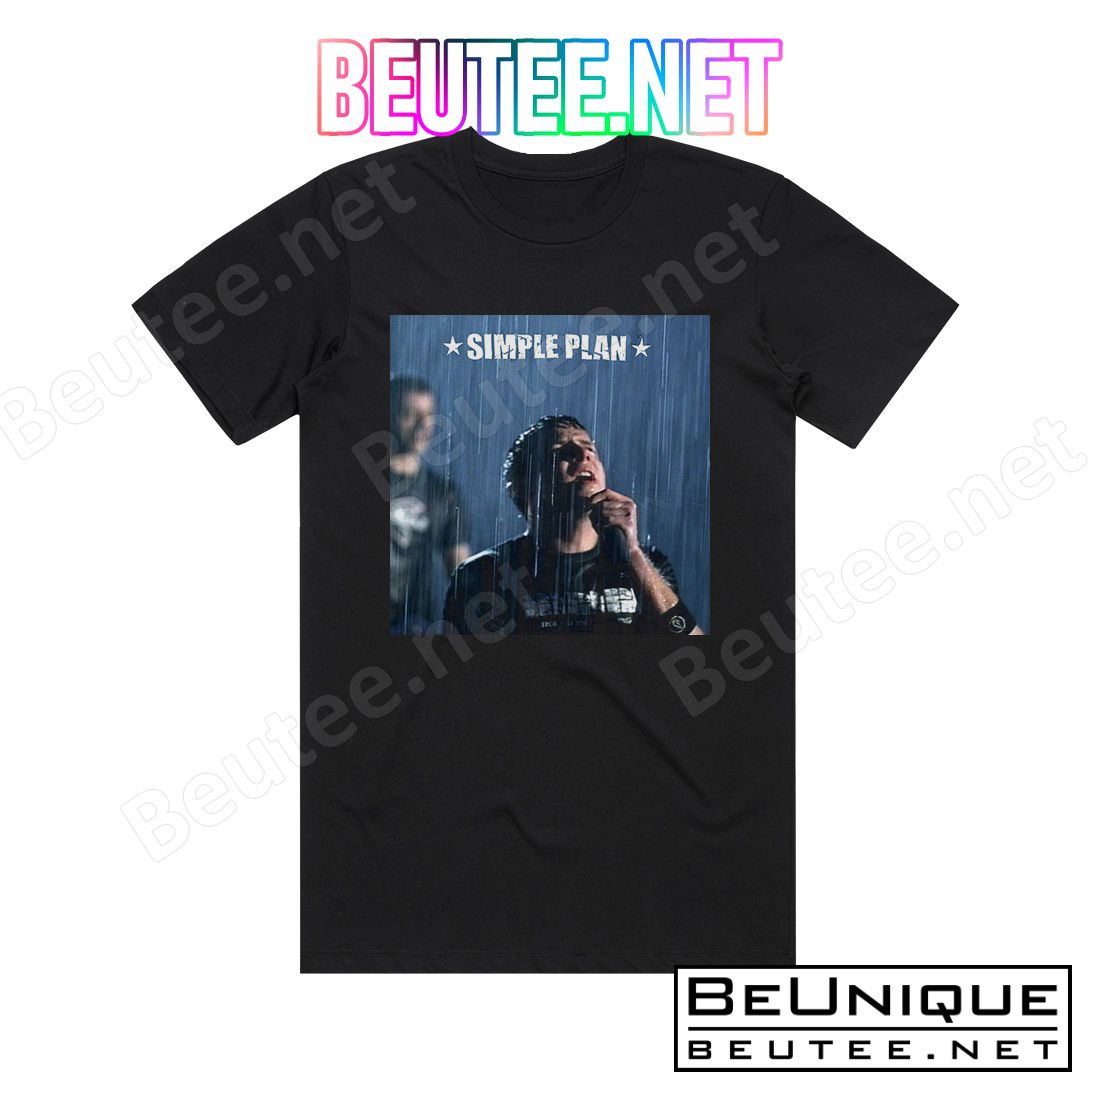 Perfect Perfect Album Cover T-Shirt